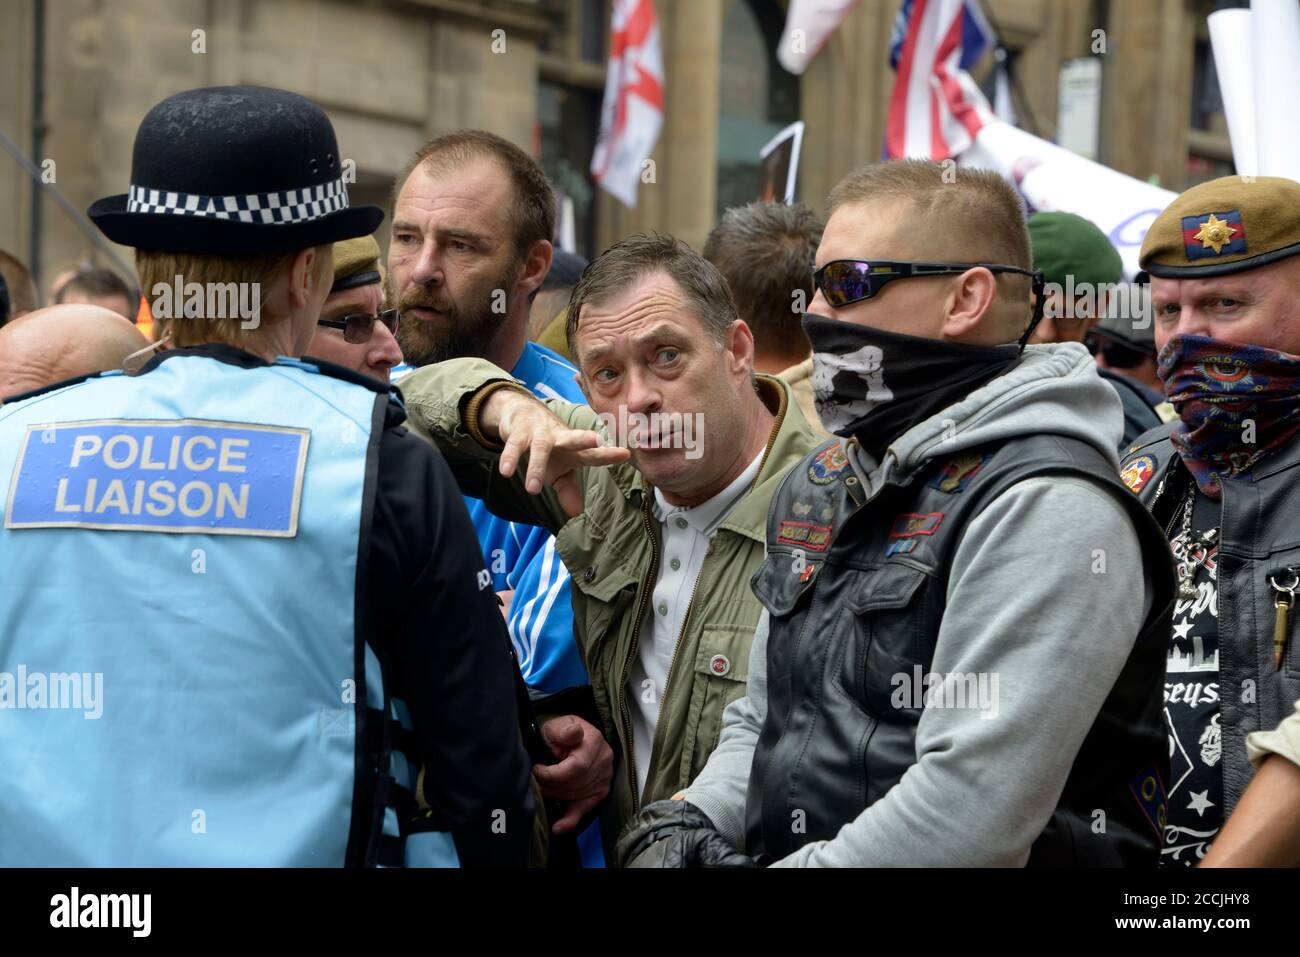 Right wing protesters, talking to police liaison, in Nottingham Stock Photo